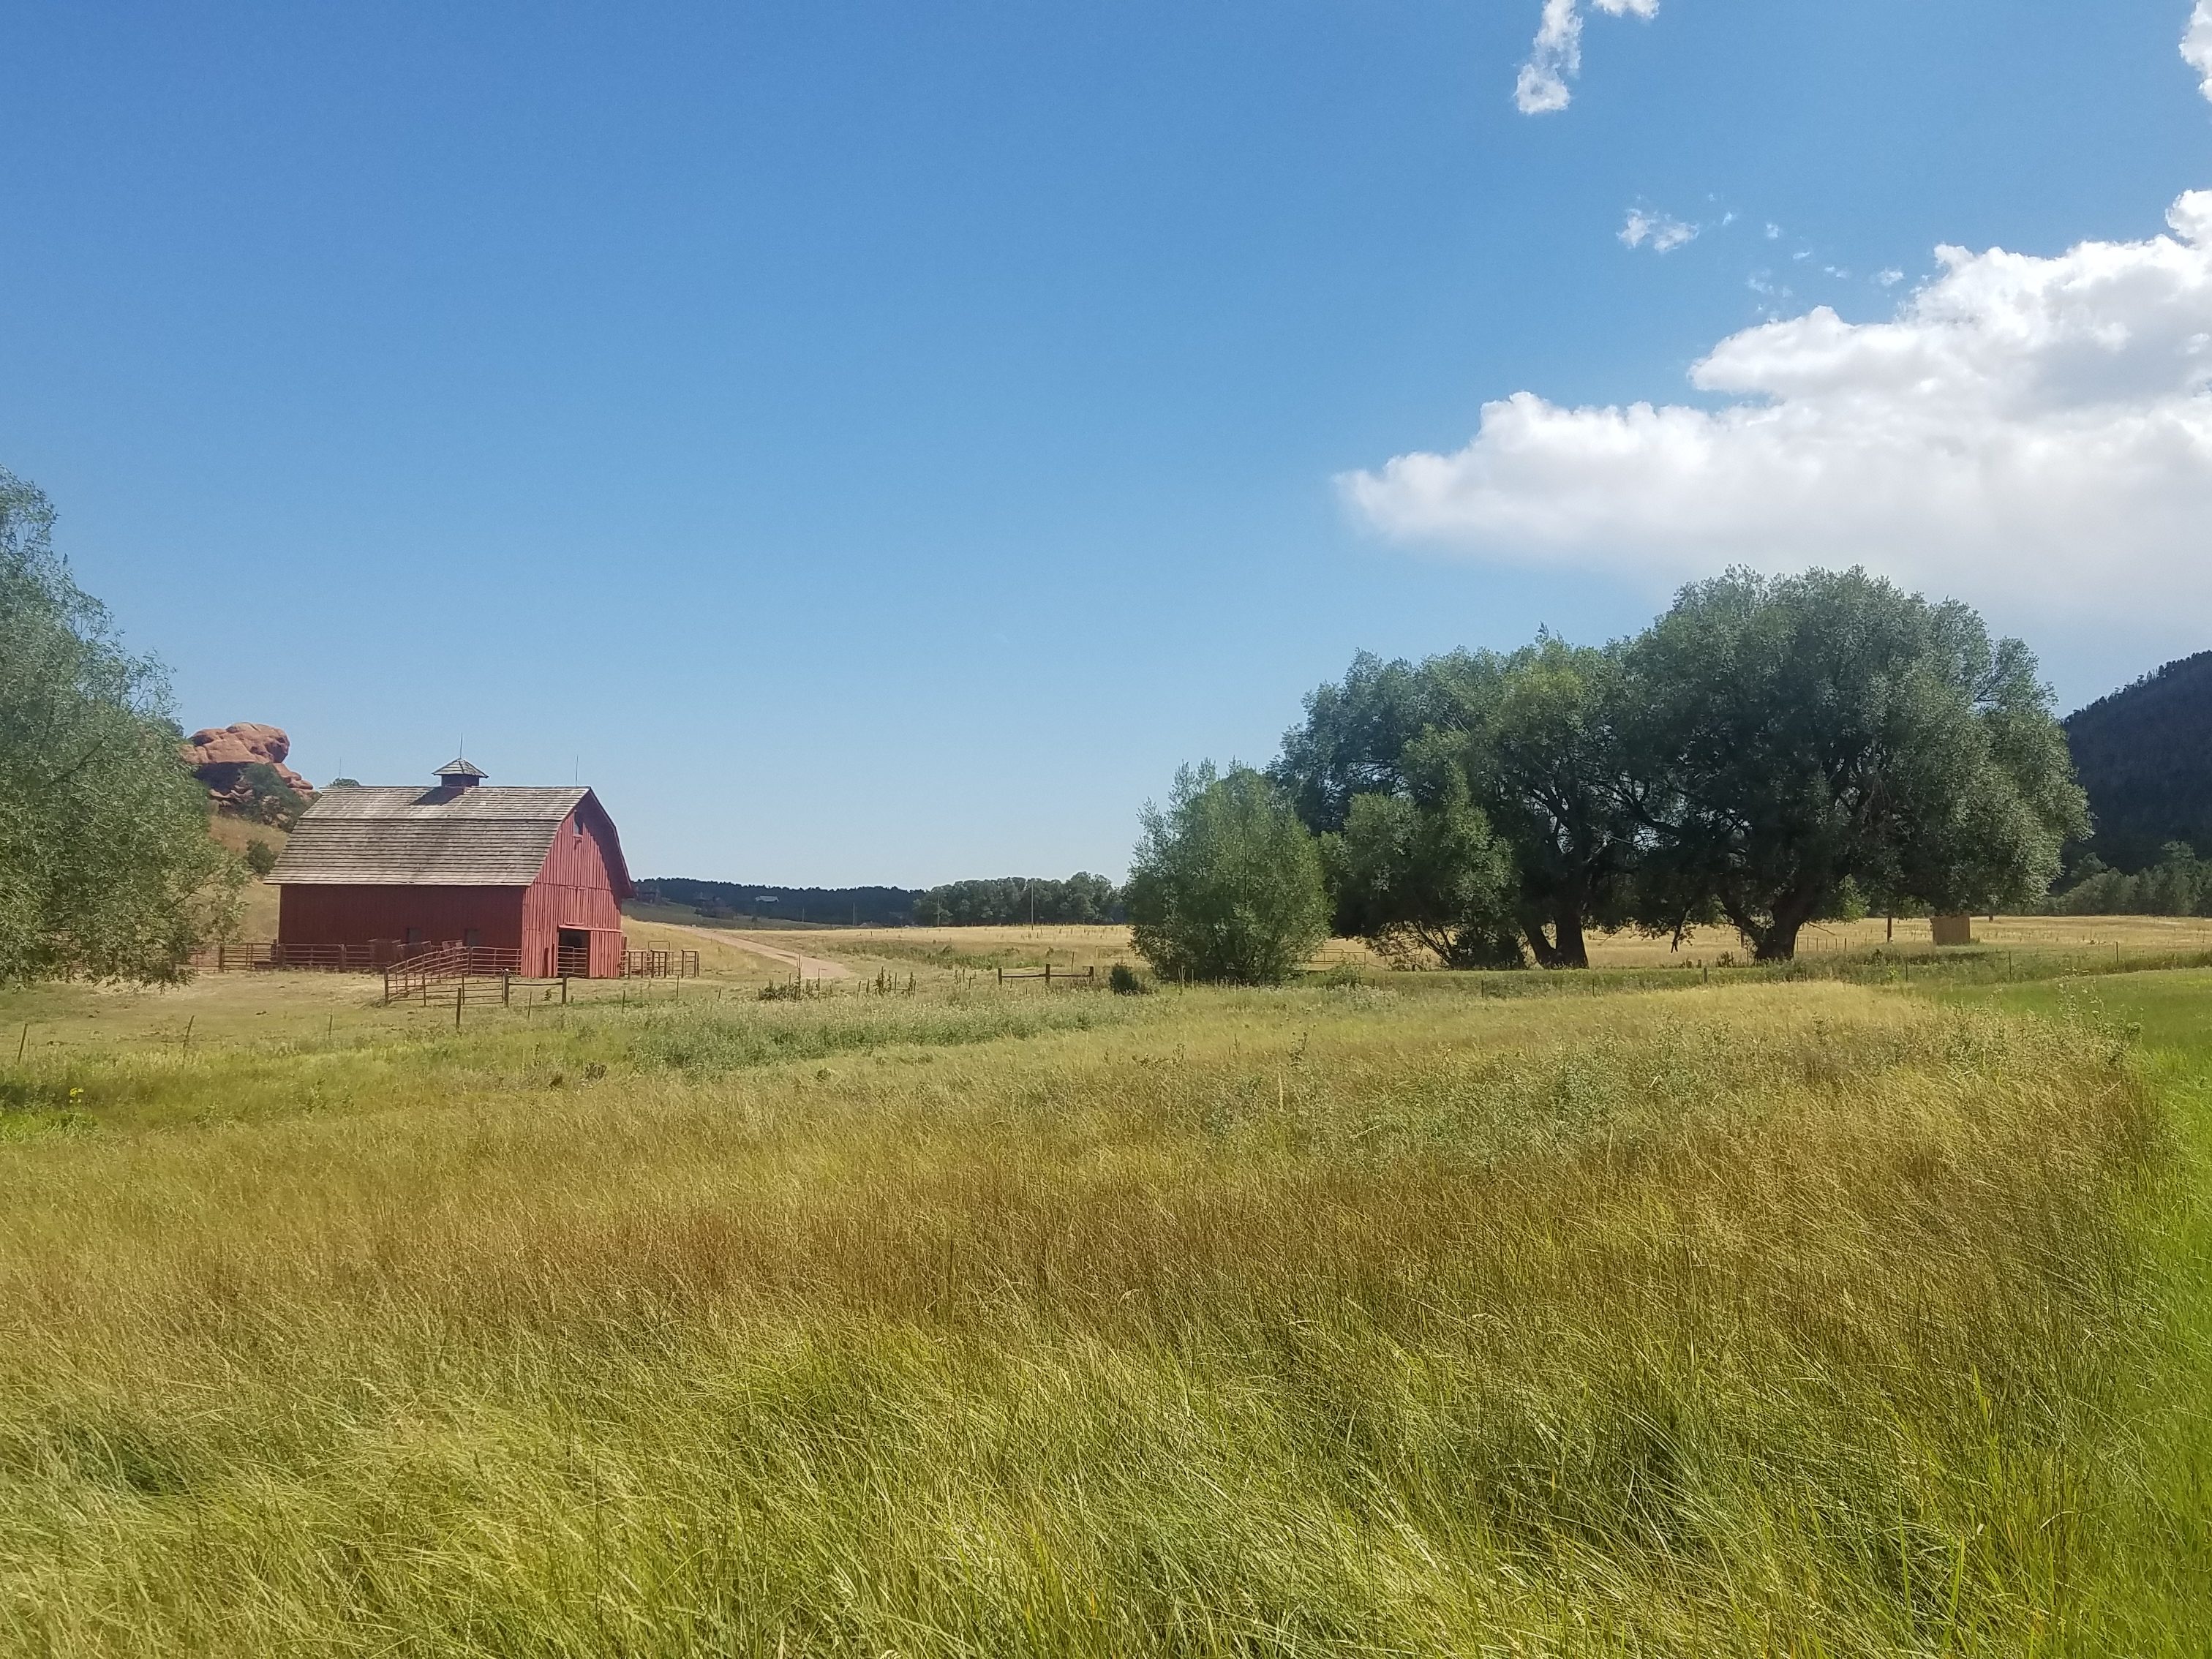 Pastoral landscape which includes a red barn cottonwood, and a field of grasses of various heights